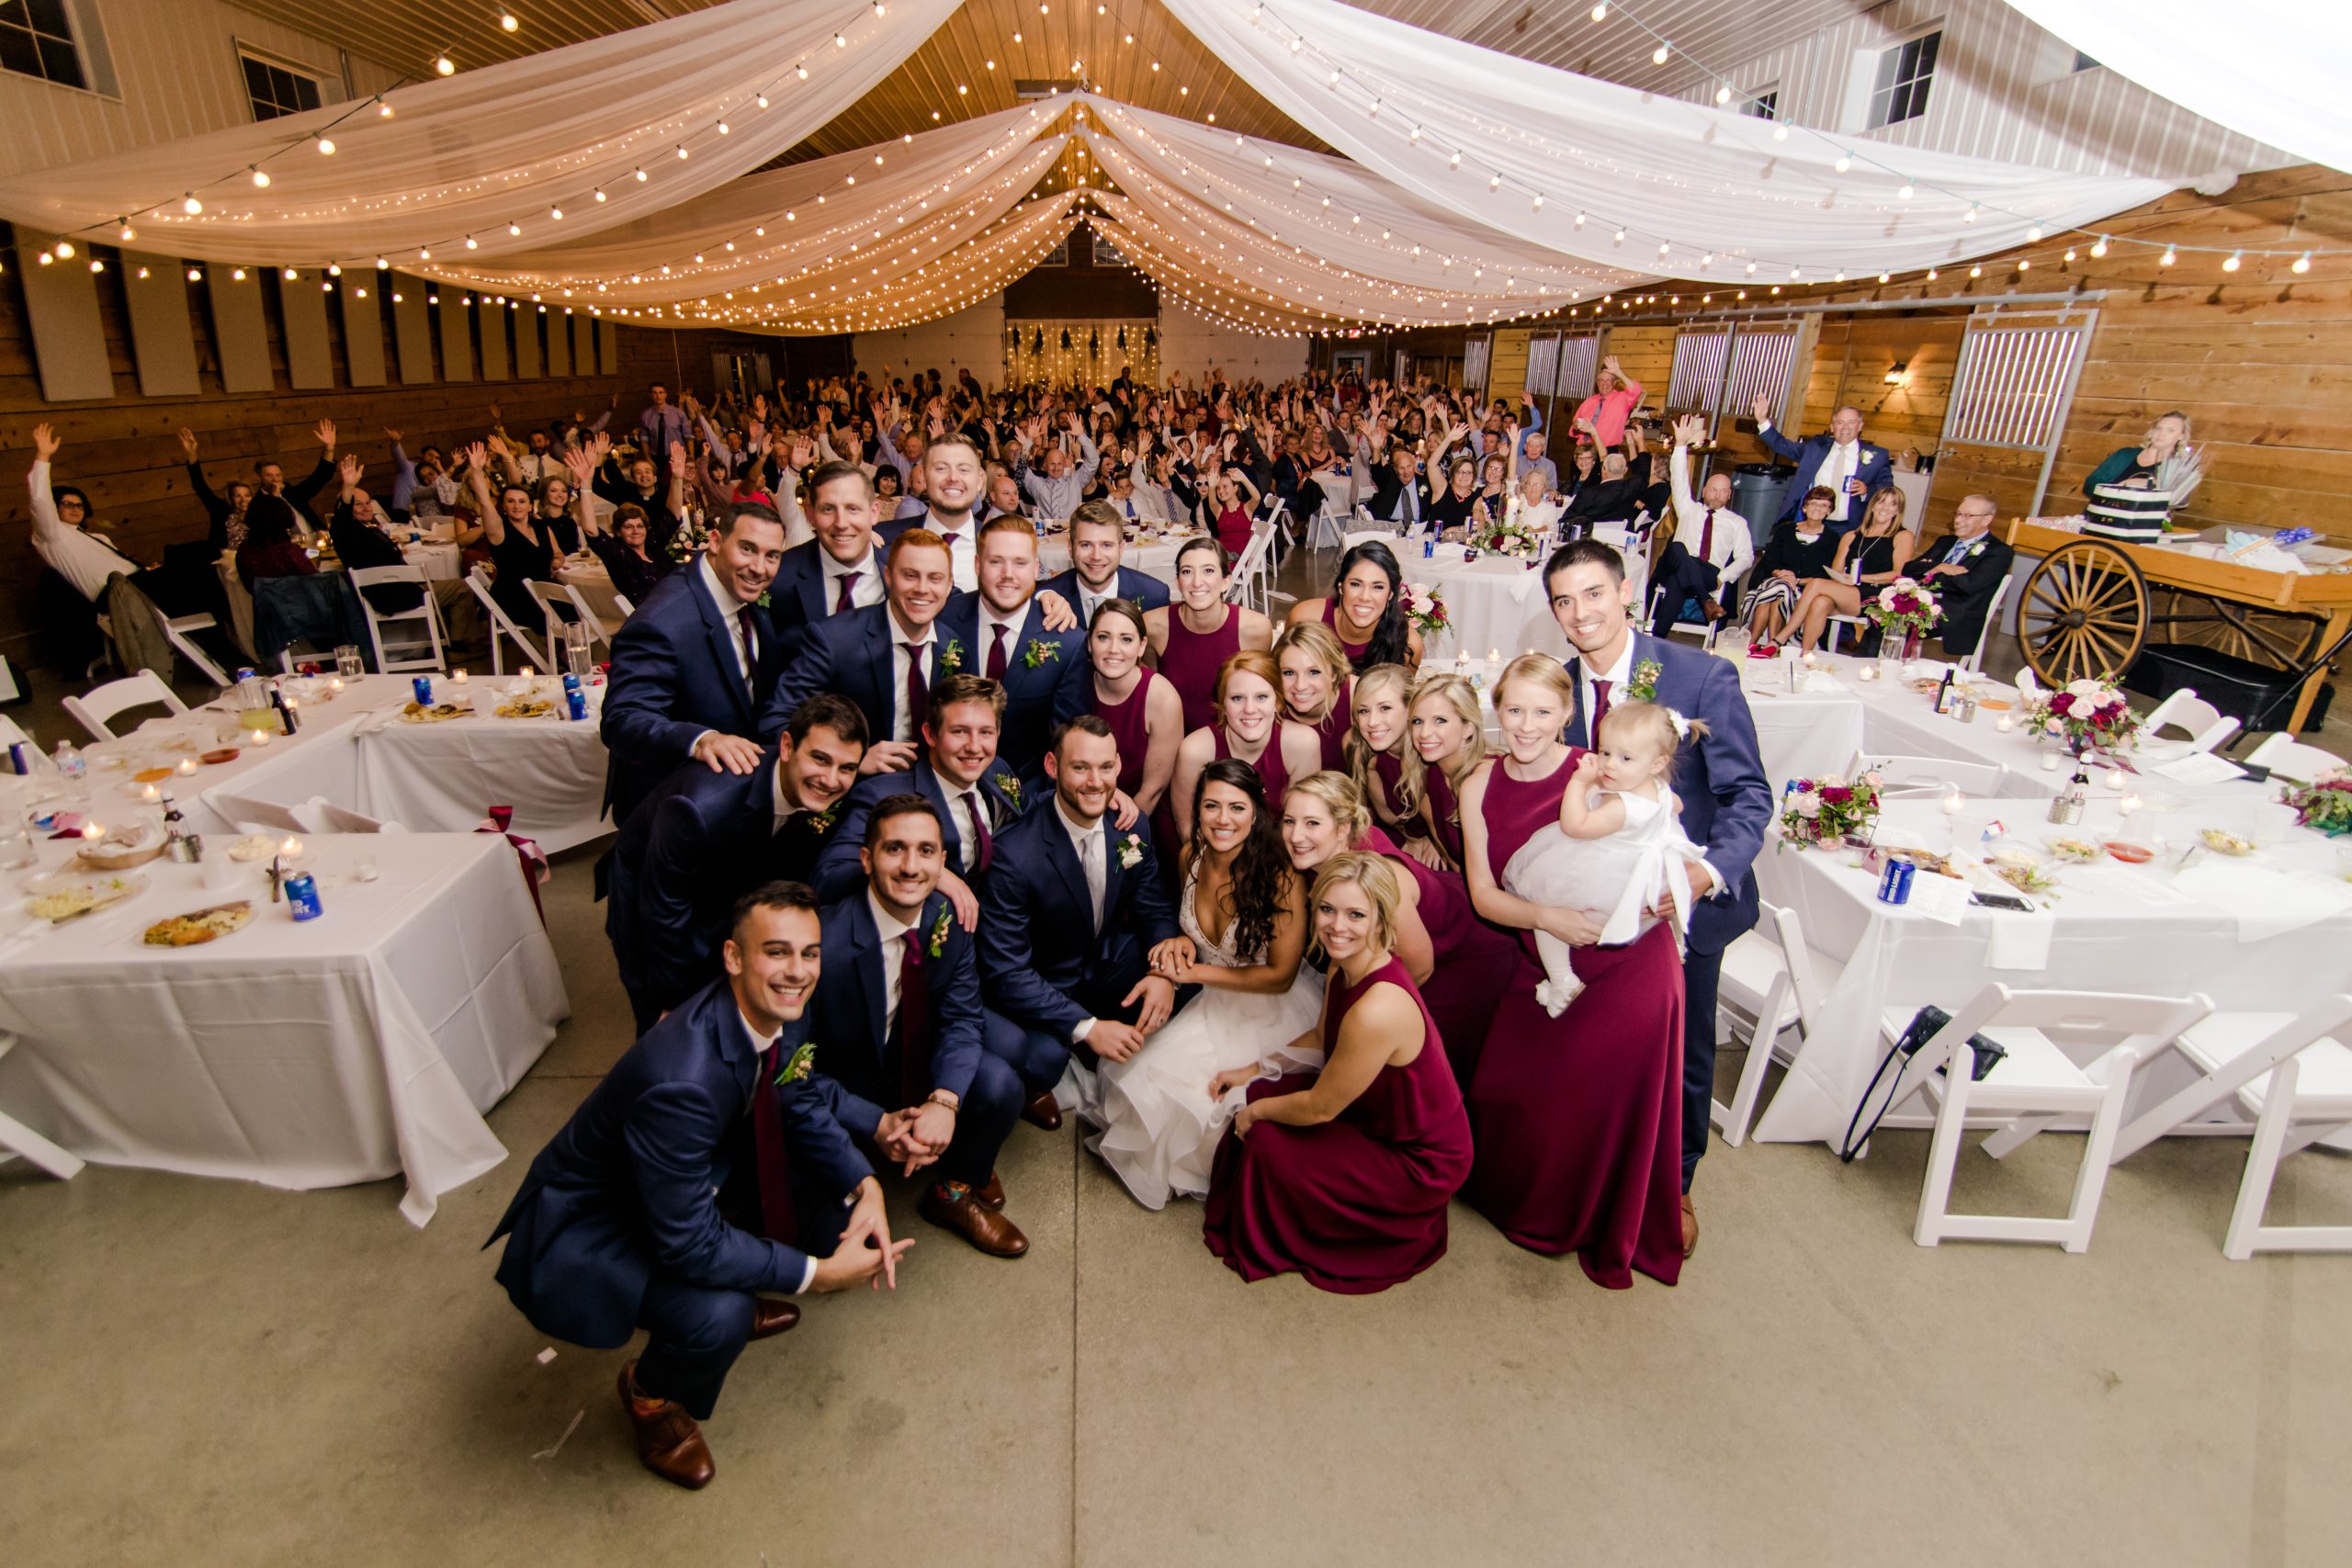 Fun group shot of all wedding guests at The Stables on Obee in Whitehouse, OH